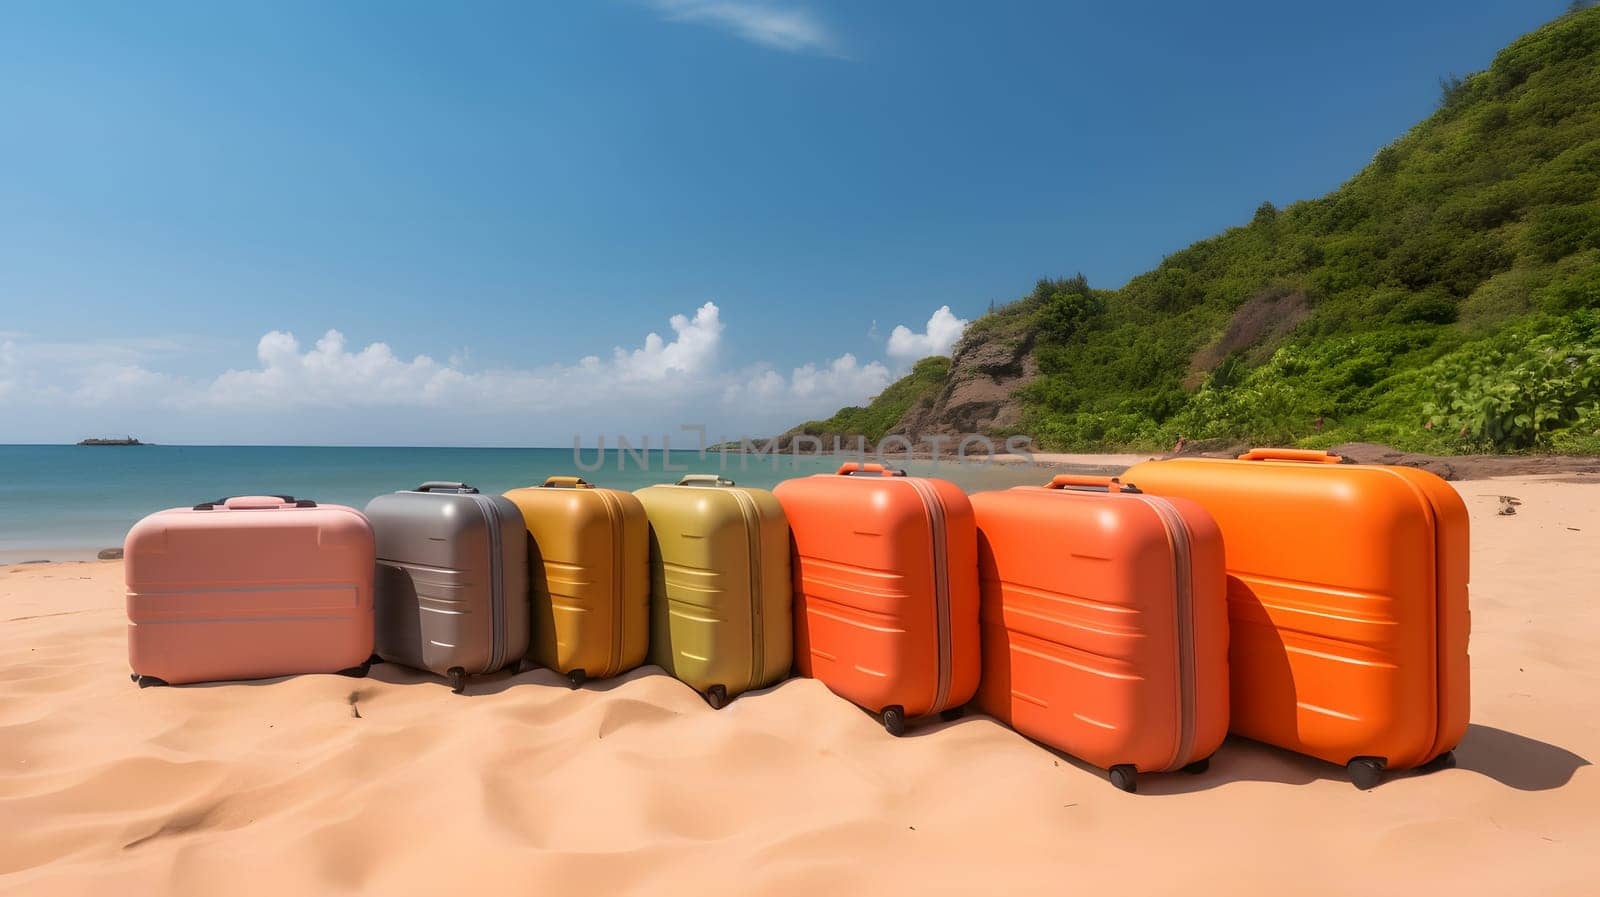 row of modern suitcases on tropical resort beach at sunny day, neural network generated art by z1b